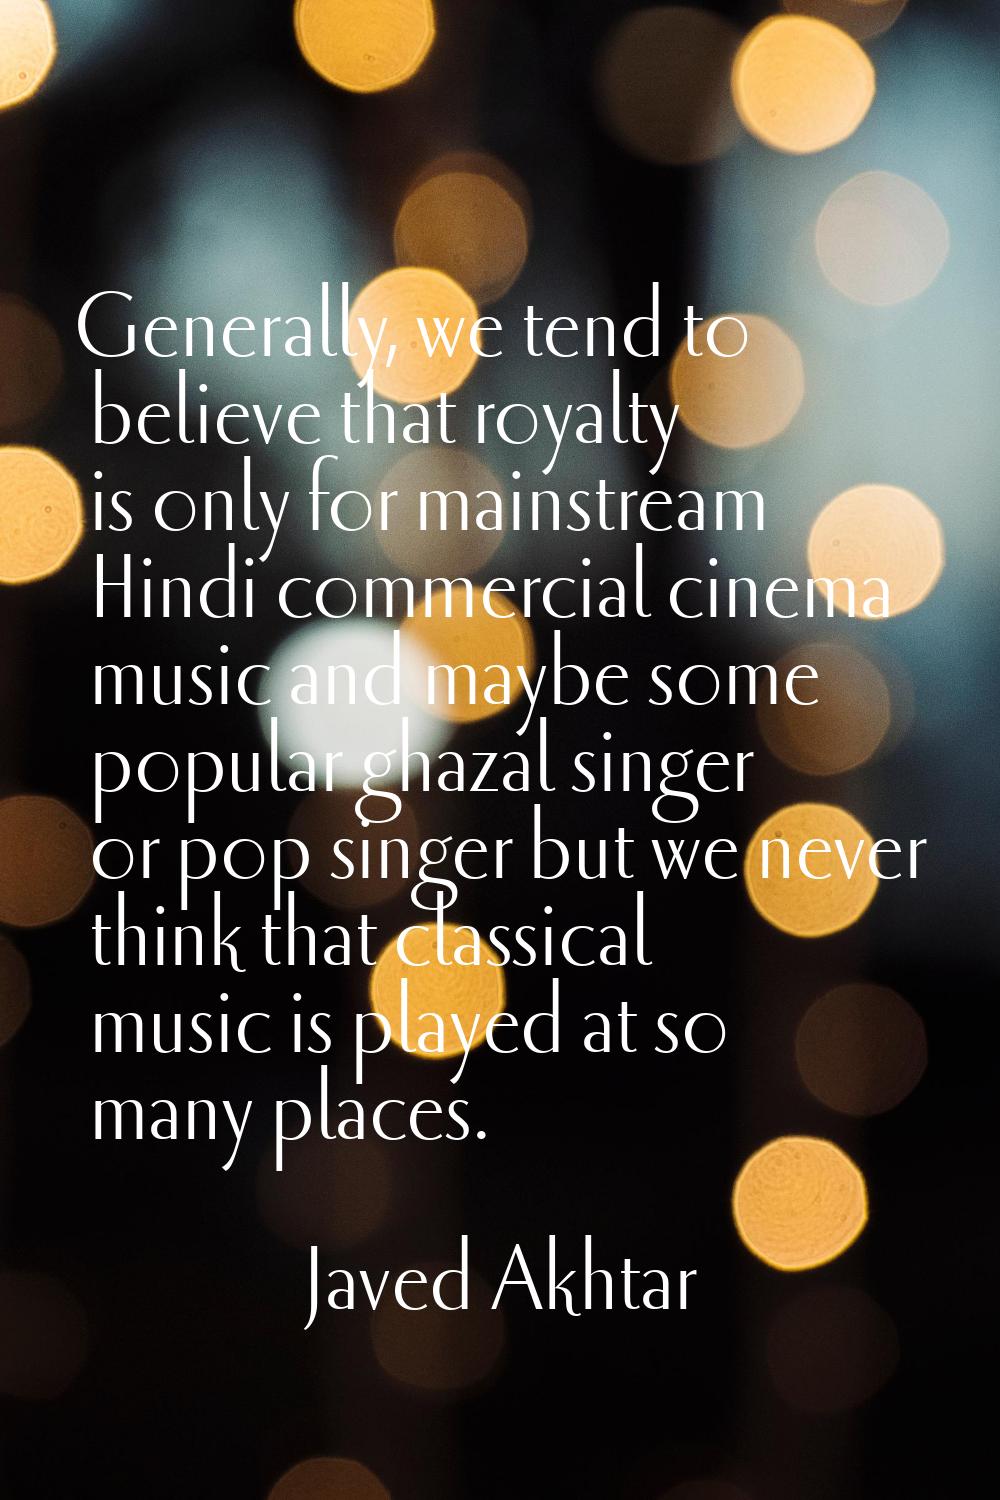 Generally, we tend to believe that royalty is only for mainstream Hindi commercial cinema music and